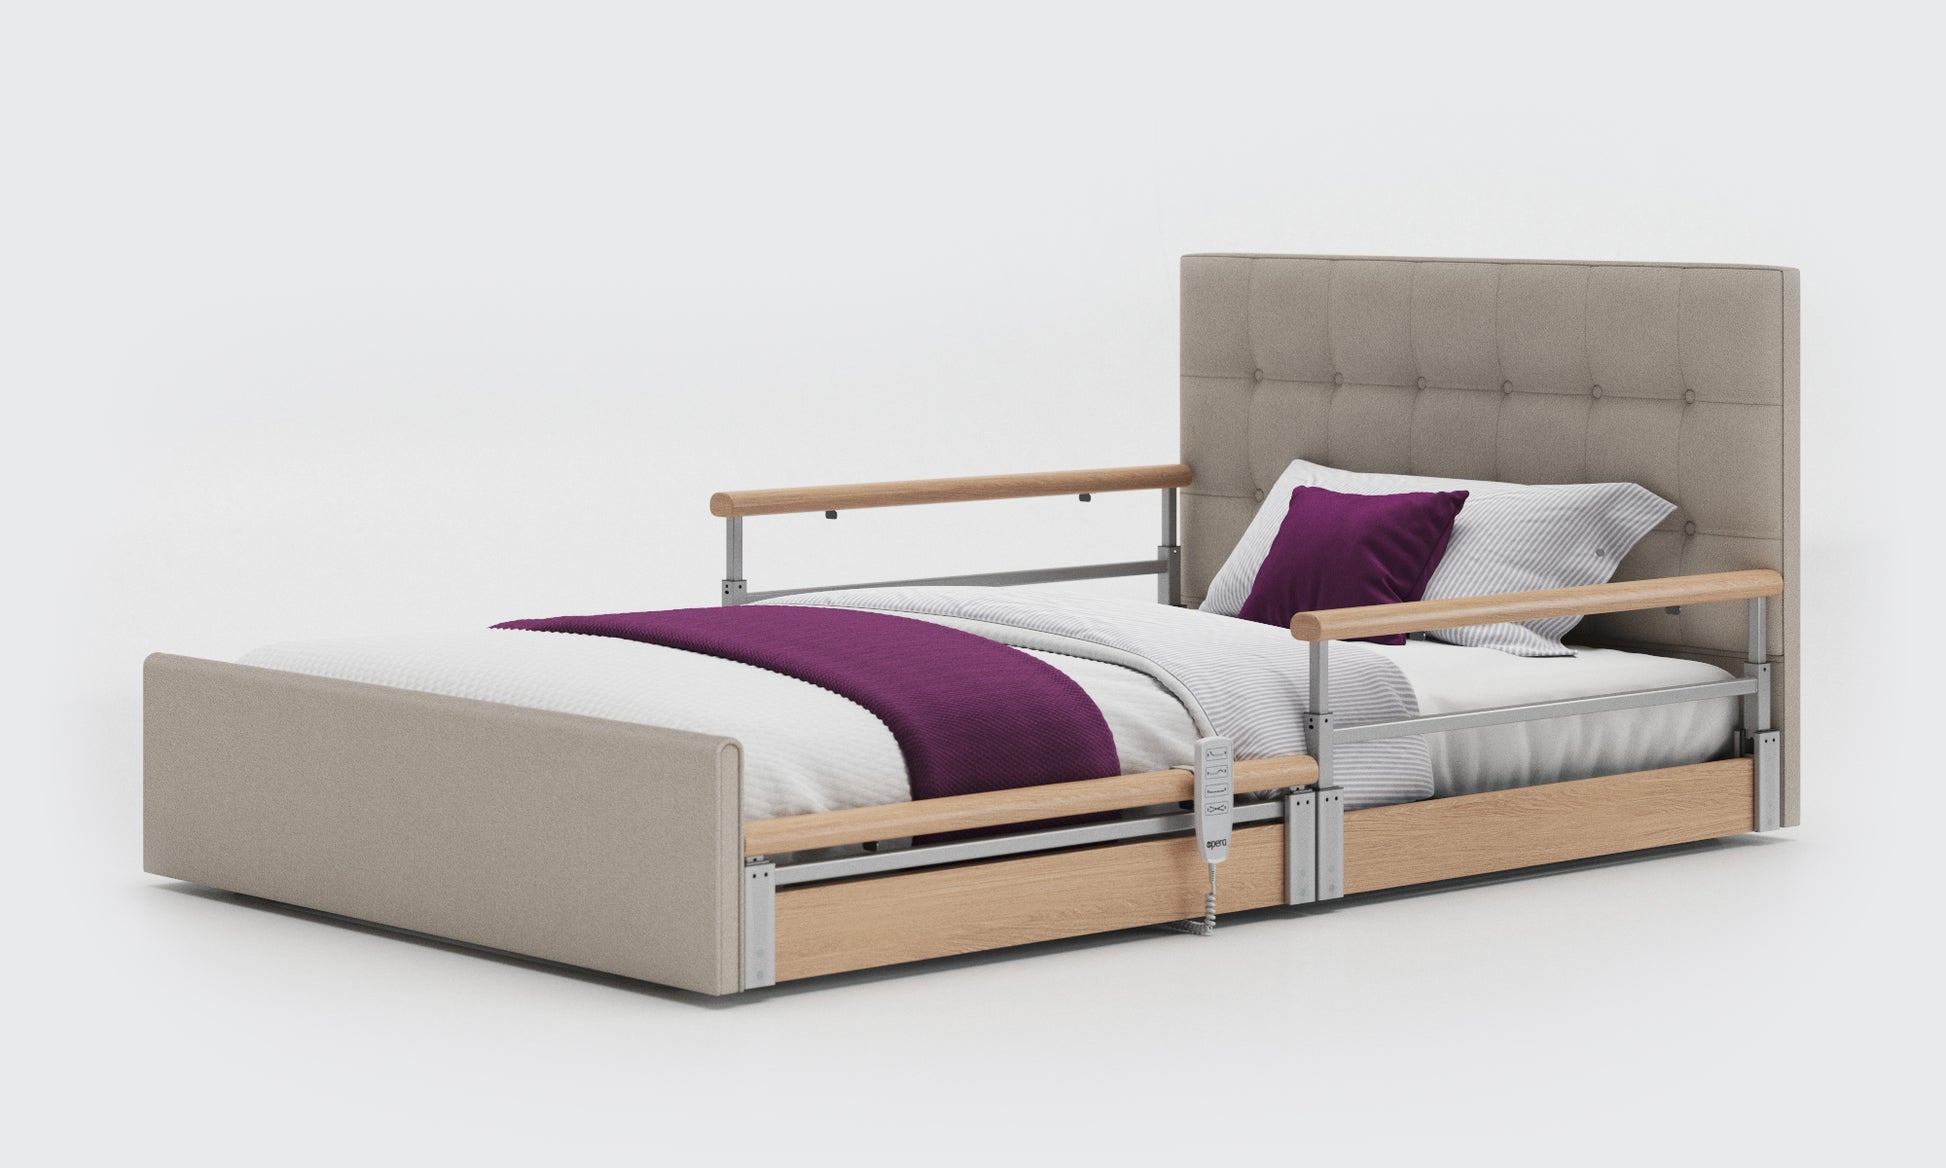 solo comfort plus bed in 4ft with oak split rails with a emerald headboard in linen fabric